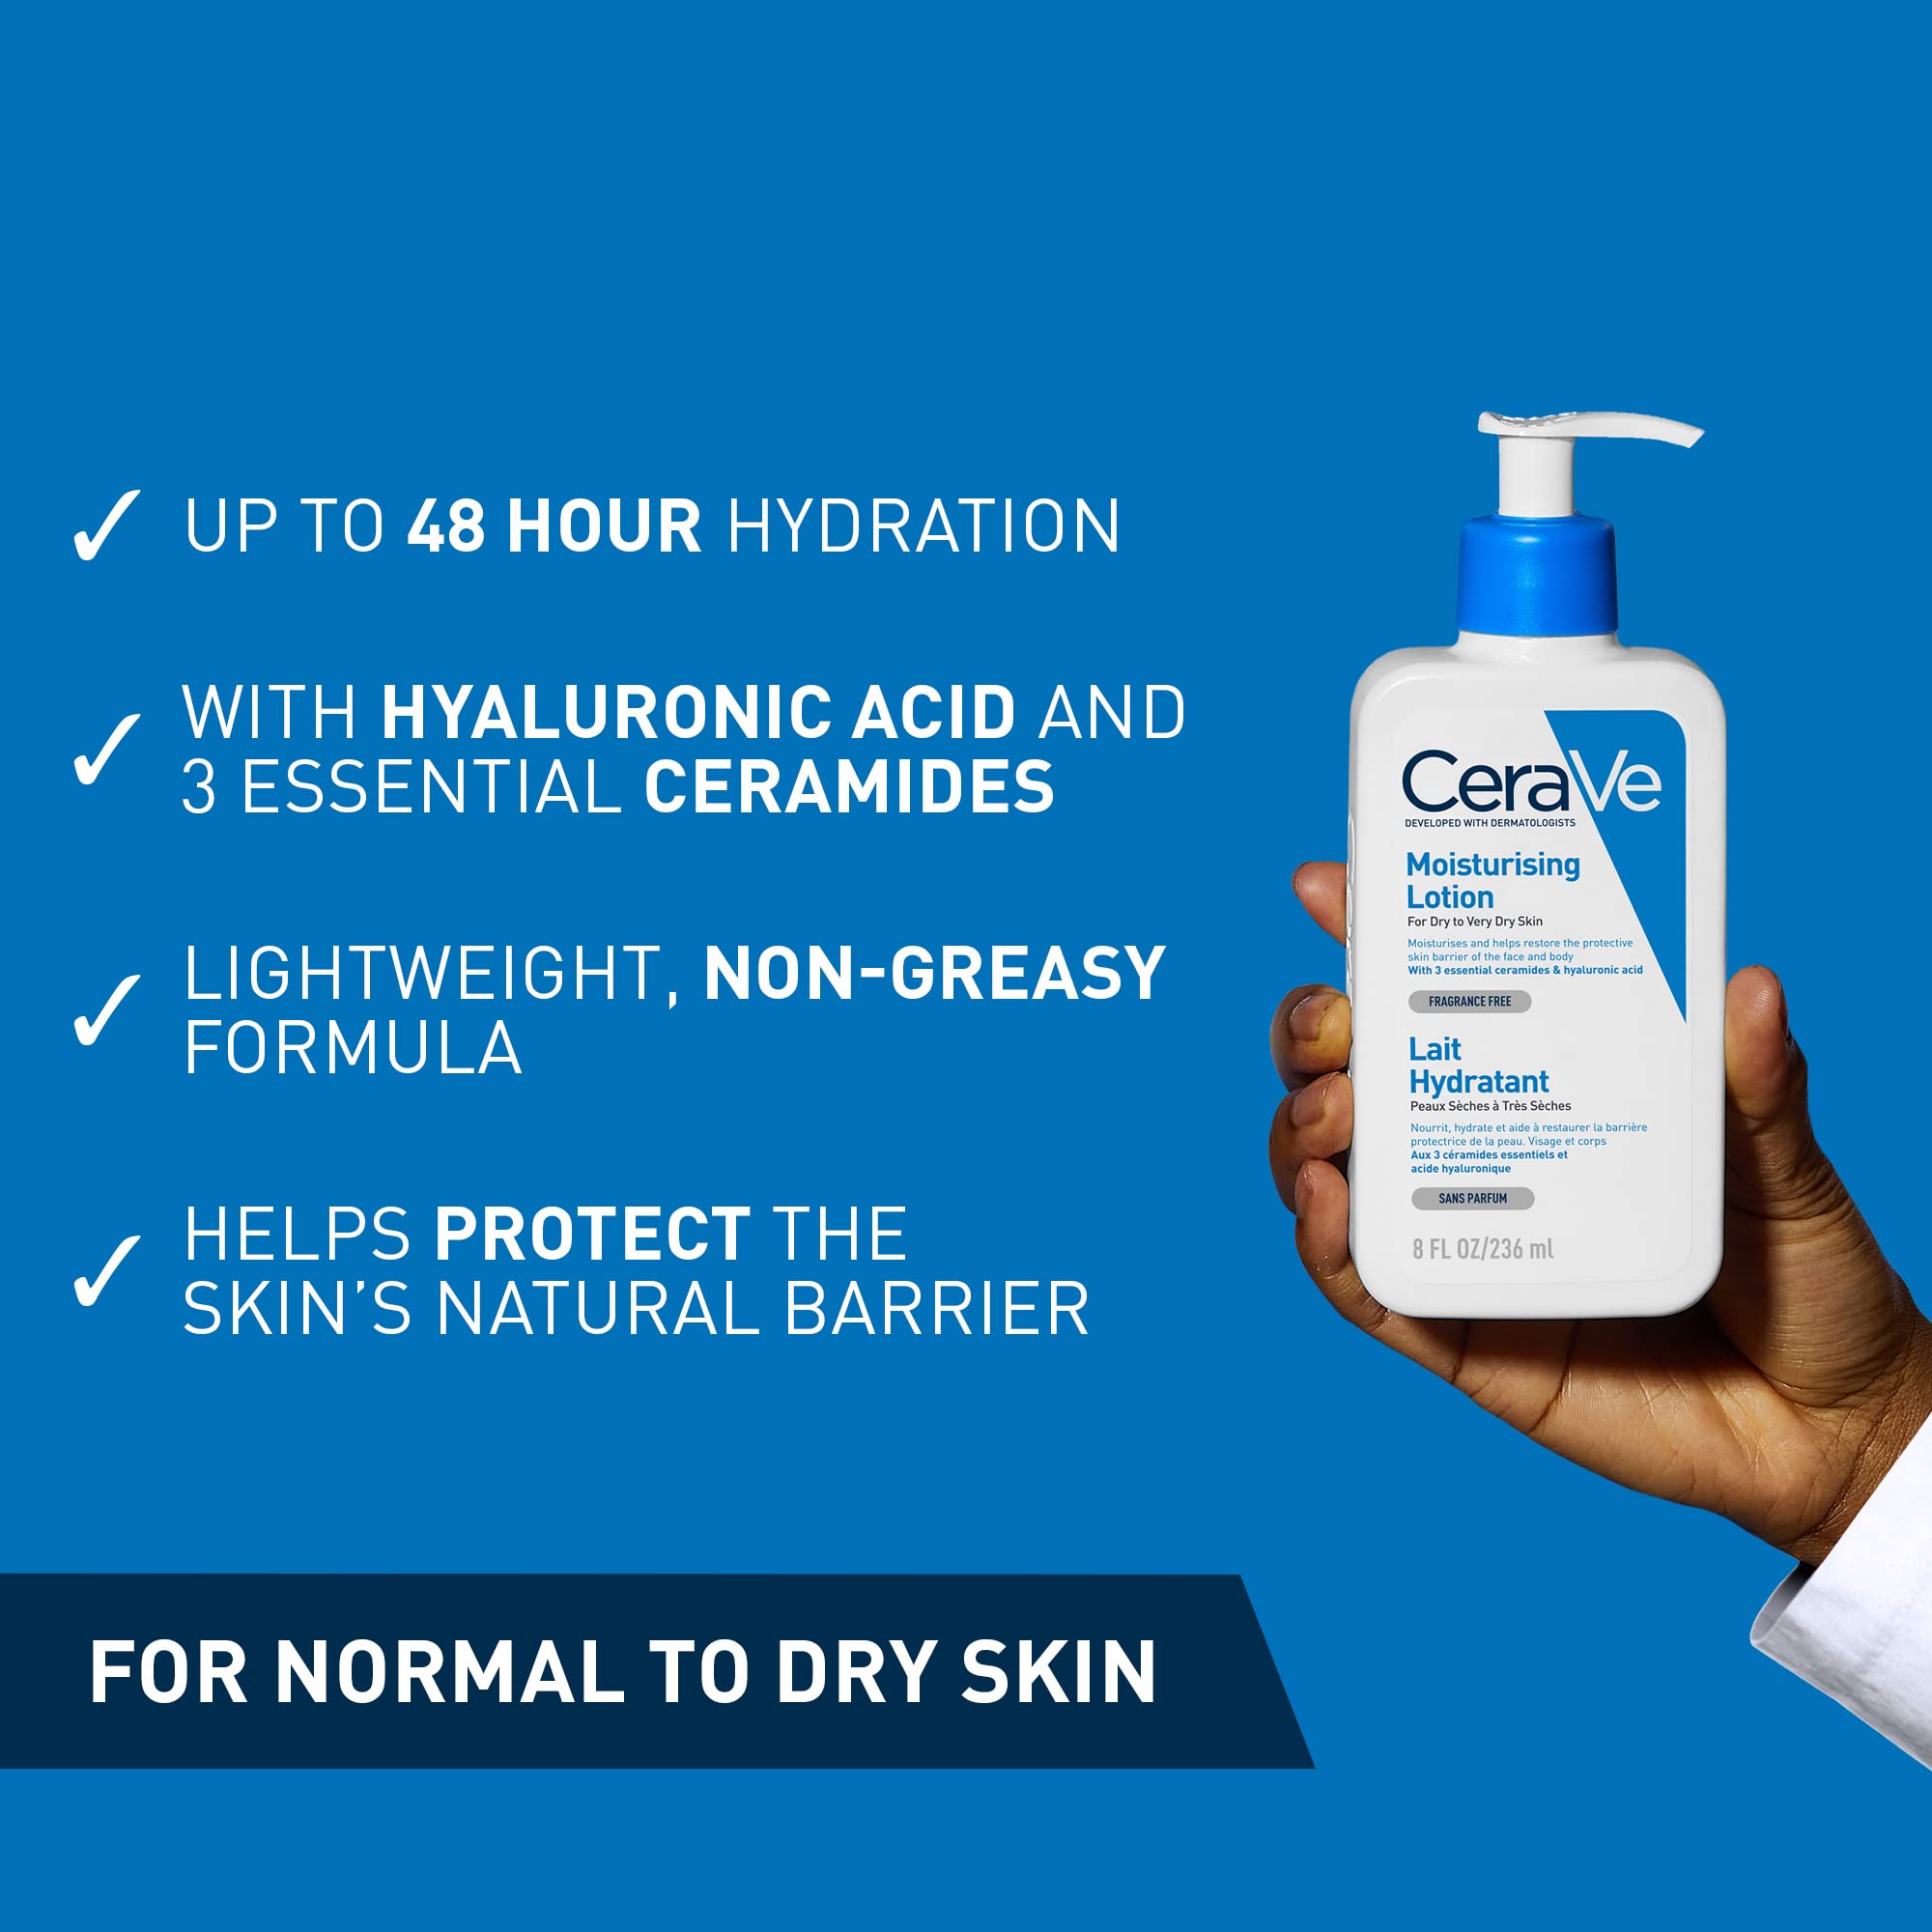 CeraVe Moisturising Lotion, with hyaluronic acid and 3 essential ceramides, Daily Face & Body Moisturiser for Dry to Very Dry Skin (Packaging may vary) 236 ml (Pack of 1)